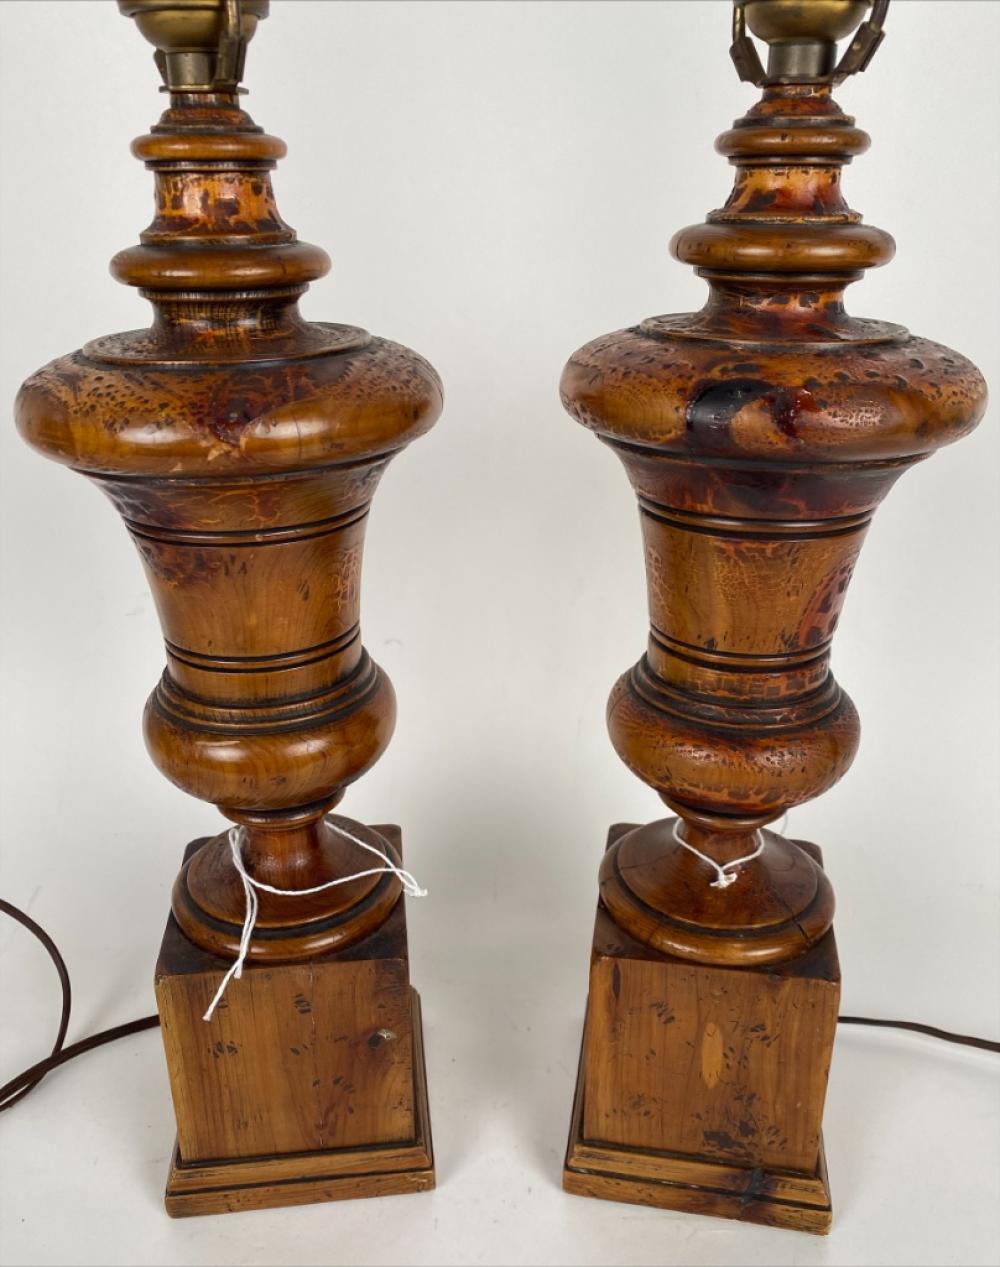 PAIR OF TURNED WOODEN TABLE LAMPS 2f2180